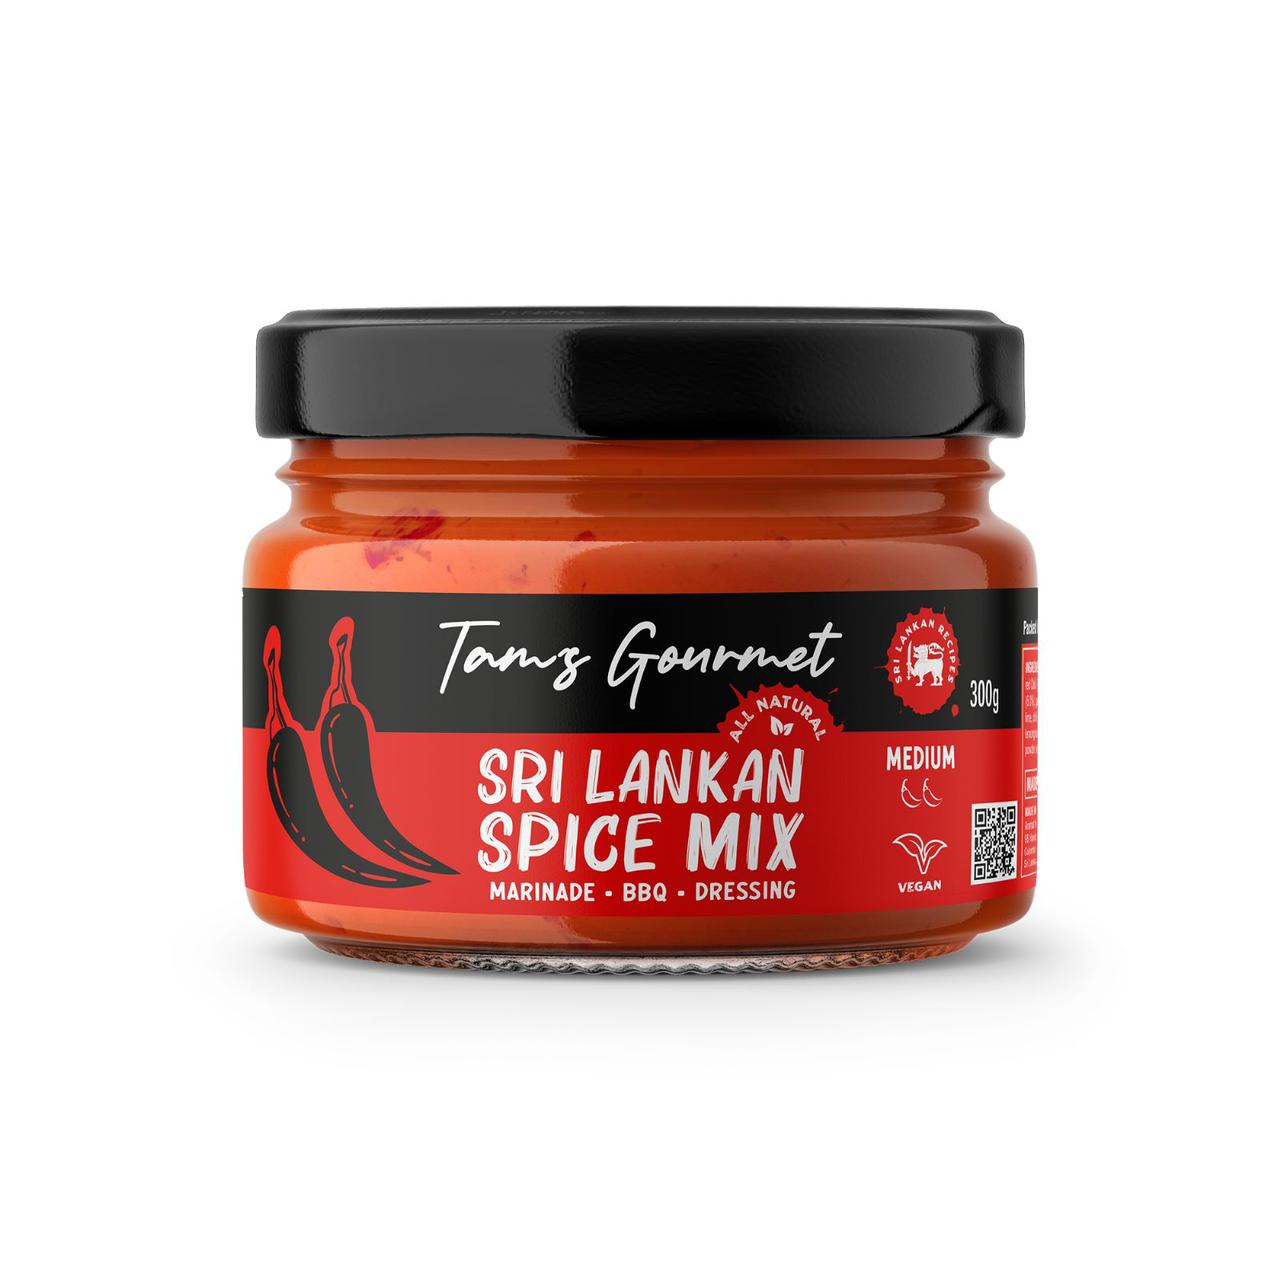 Sri Lankan Spice Mix sauce 300g  by Tam's Gourmet  10% off